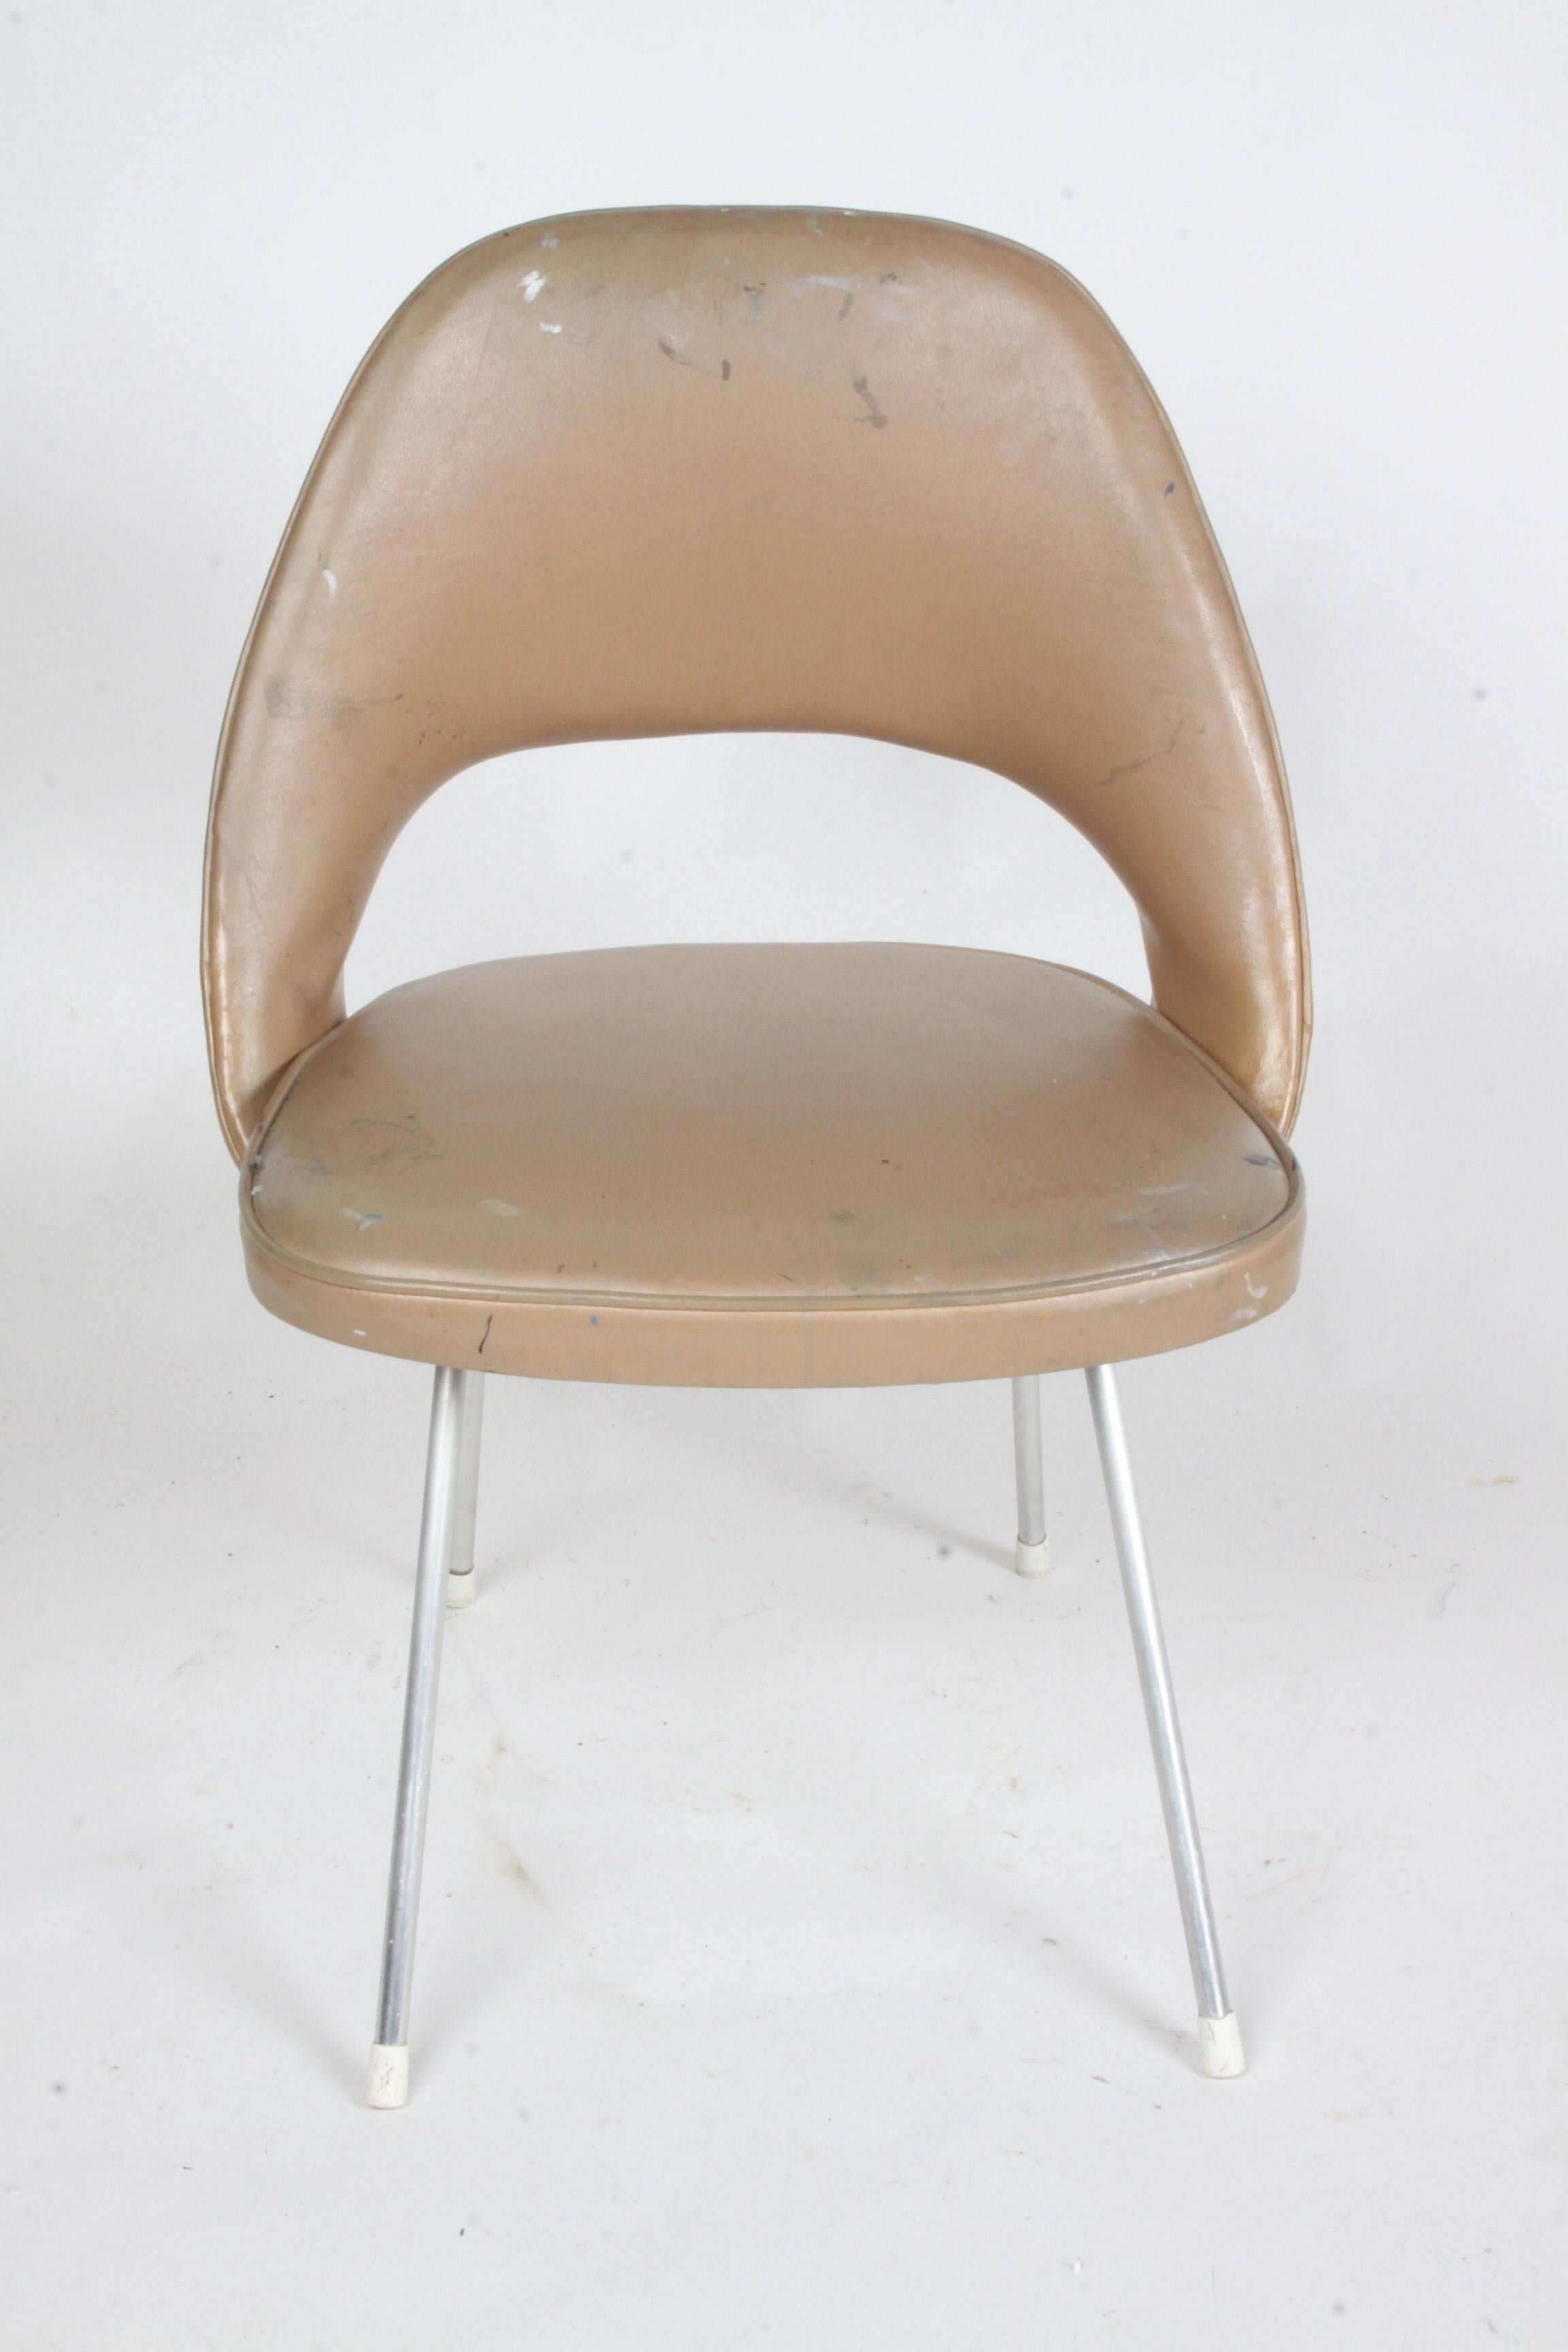 Early version of Eero Saarinen side chair for Knoll with early label. This version has aluminum legs and early base configuration, unlike the later segmented legs. Chair should be recovered, paint may be able to removed if originality is desired.